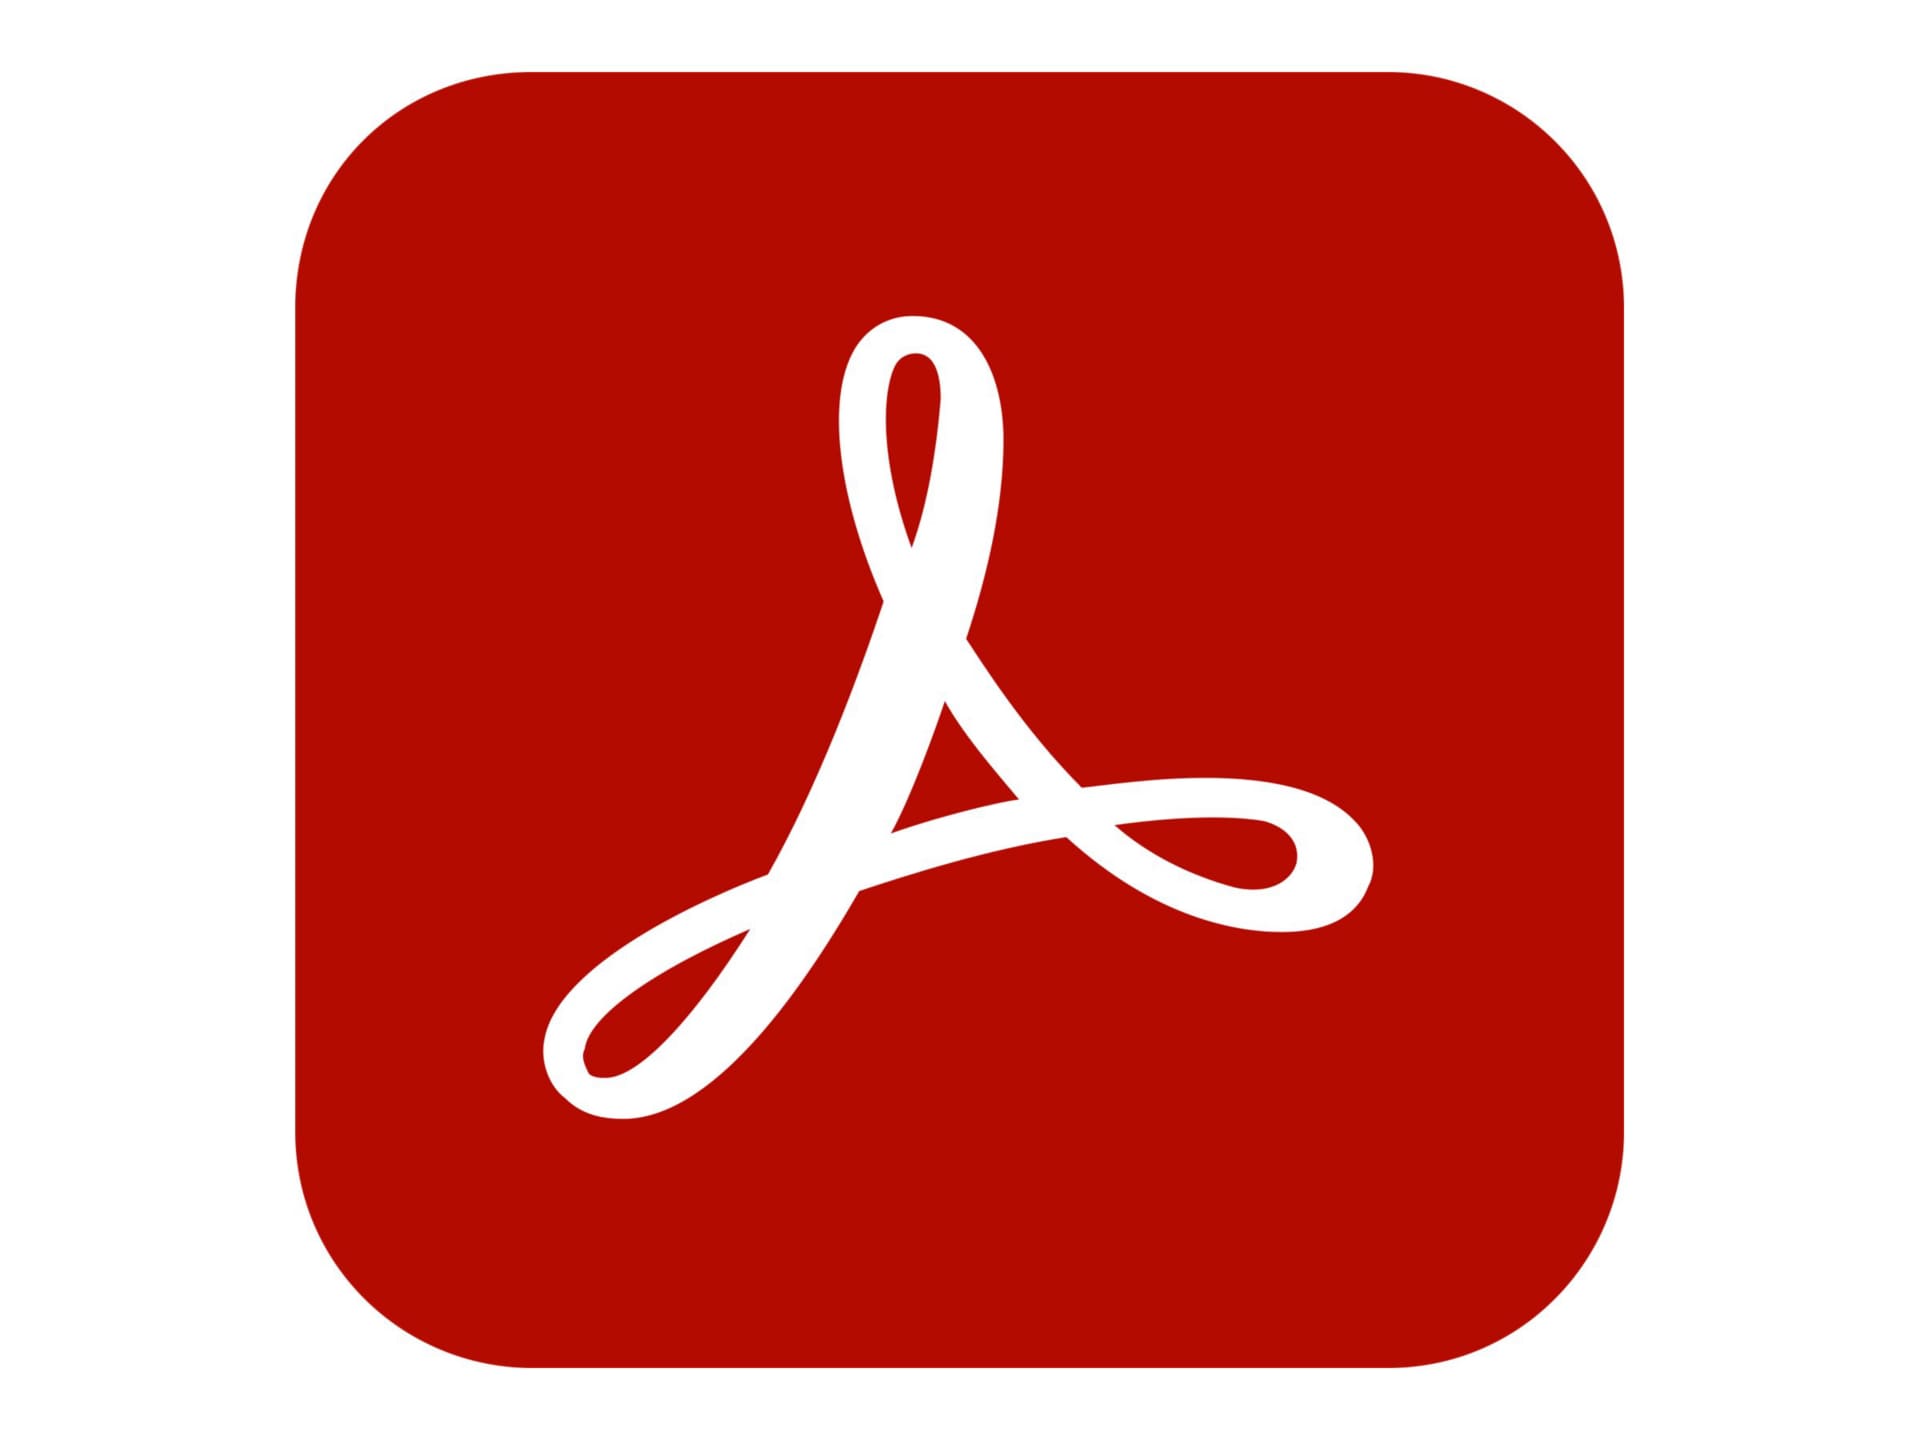 Adobe Acrobat Pro for teams - Subscription New (6 months) - 1 named user